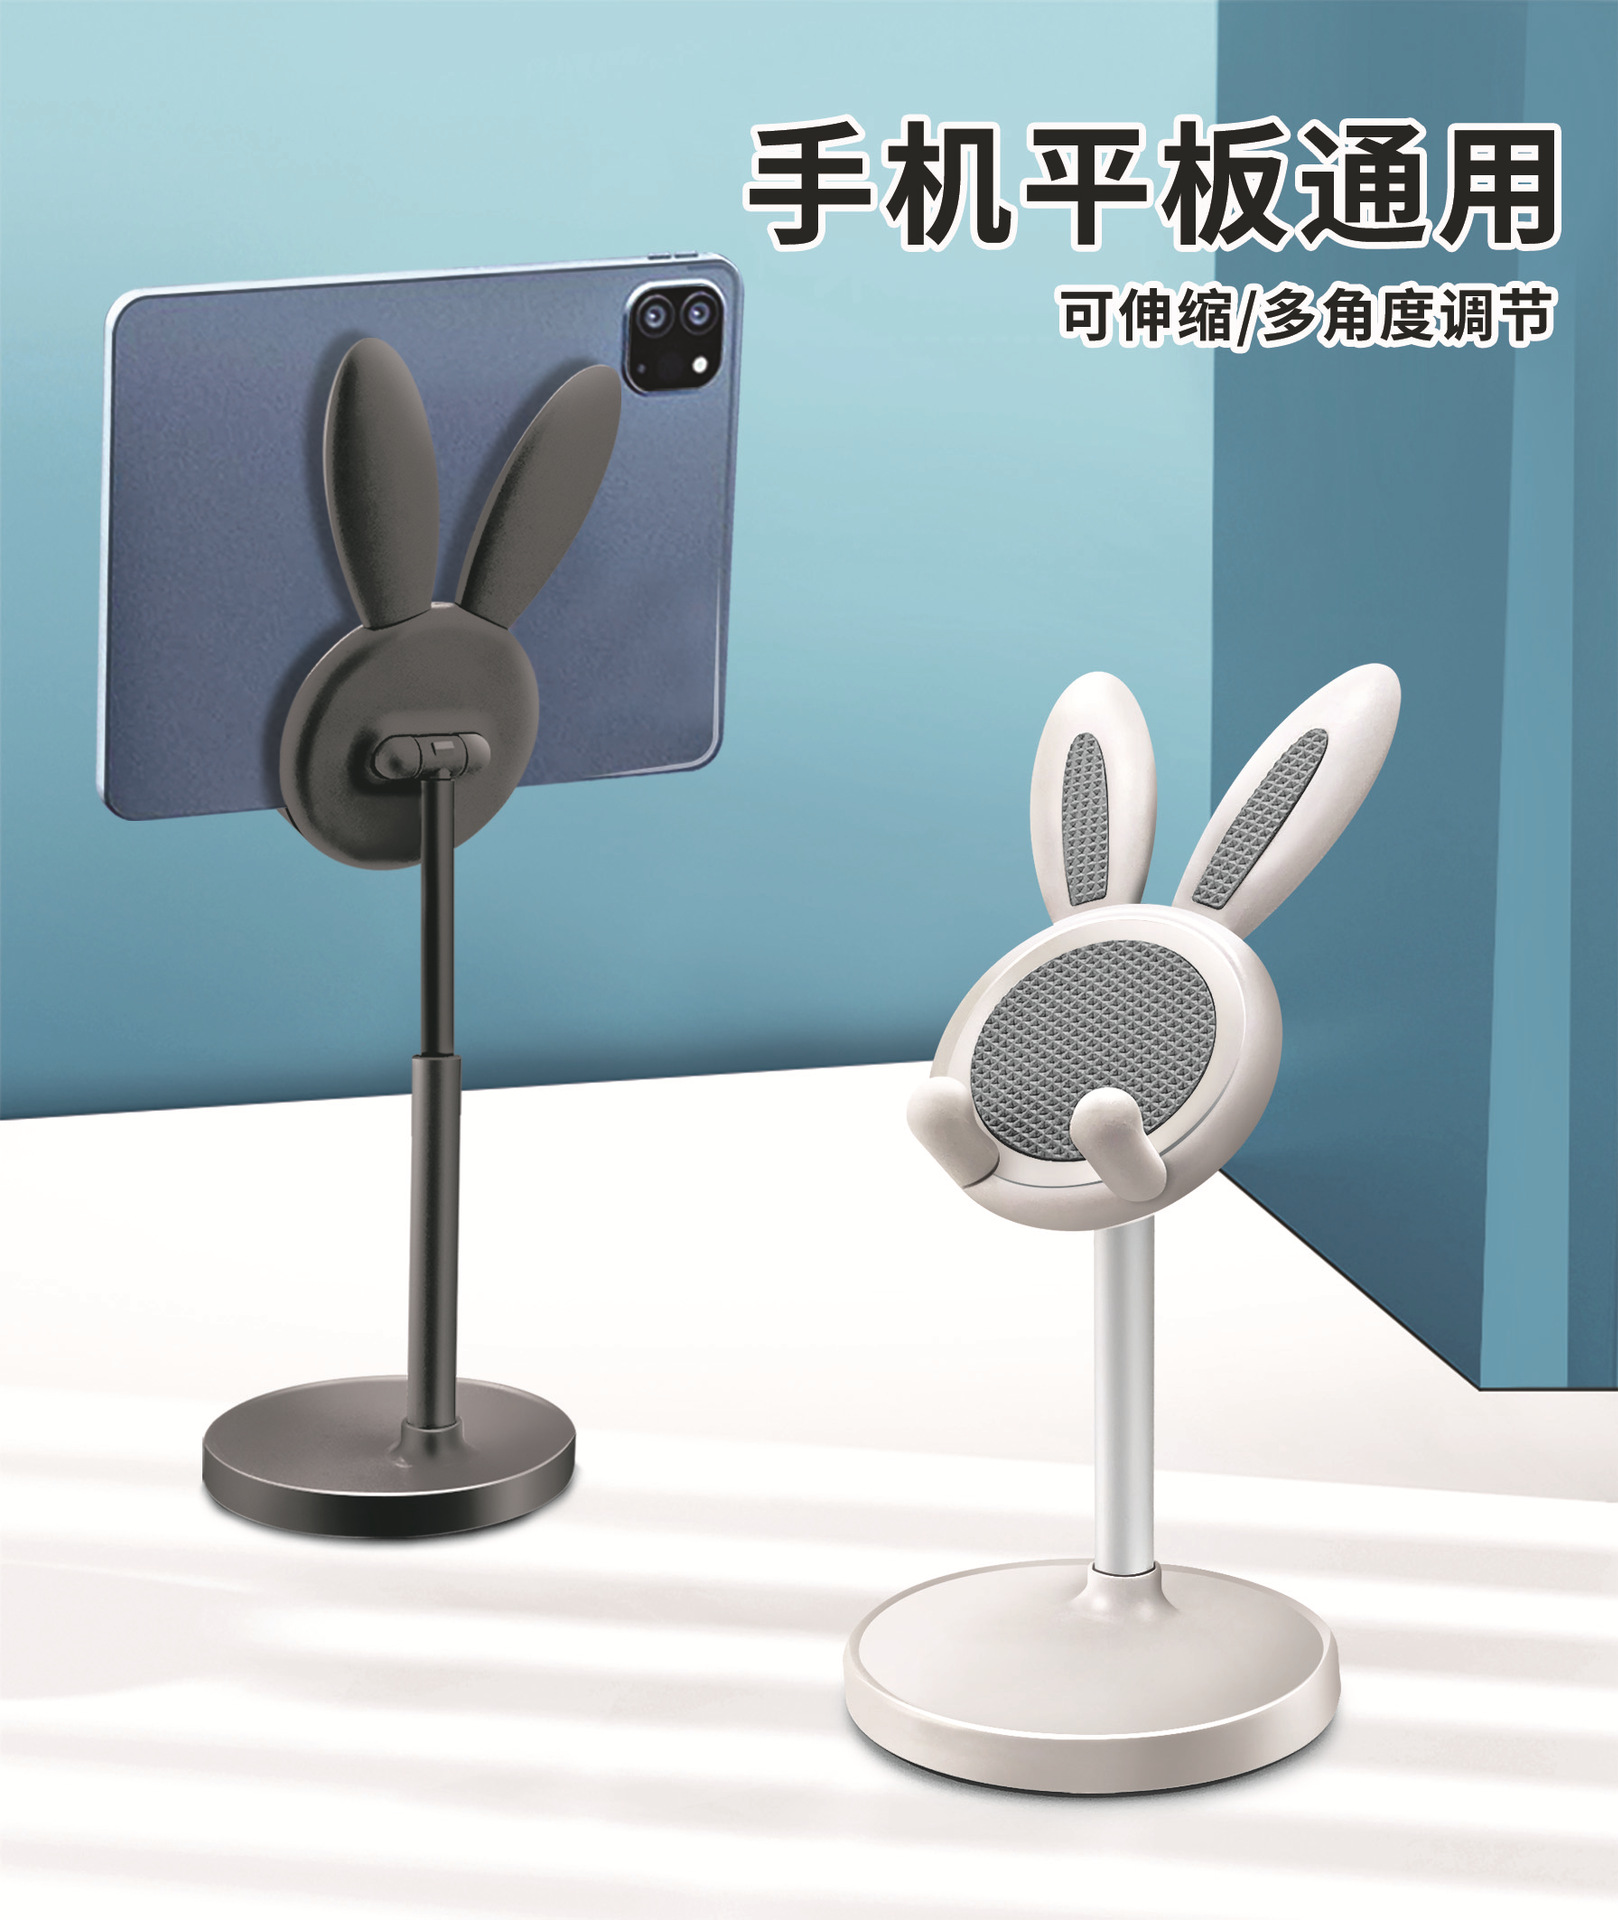 Cartoon Mobile Desktop Stand Adjustable Lifting and Reducing Portable for iPad Stand Lazy Phone Holder